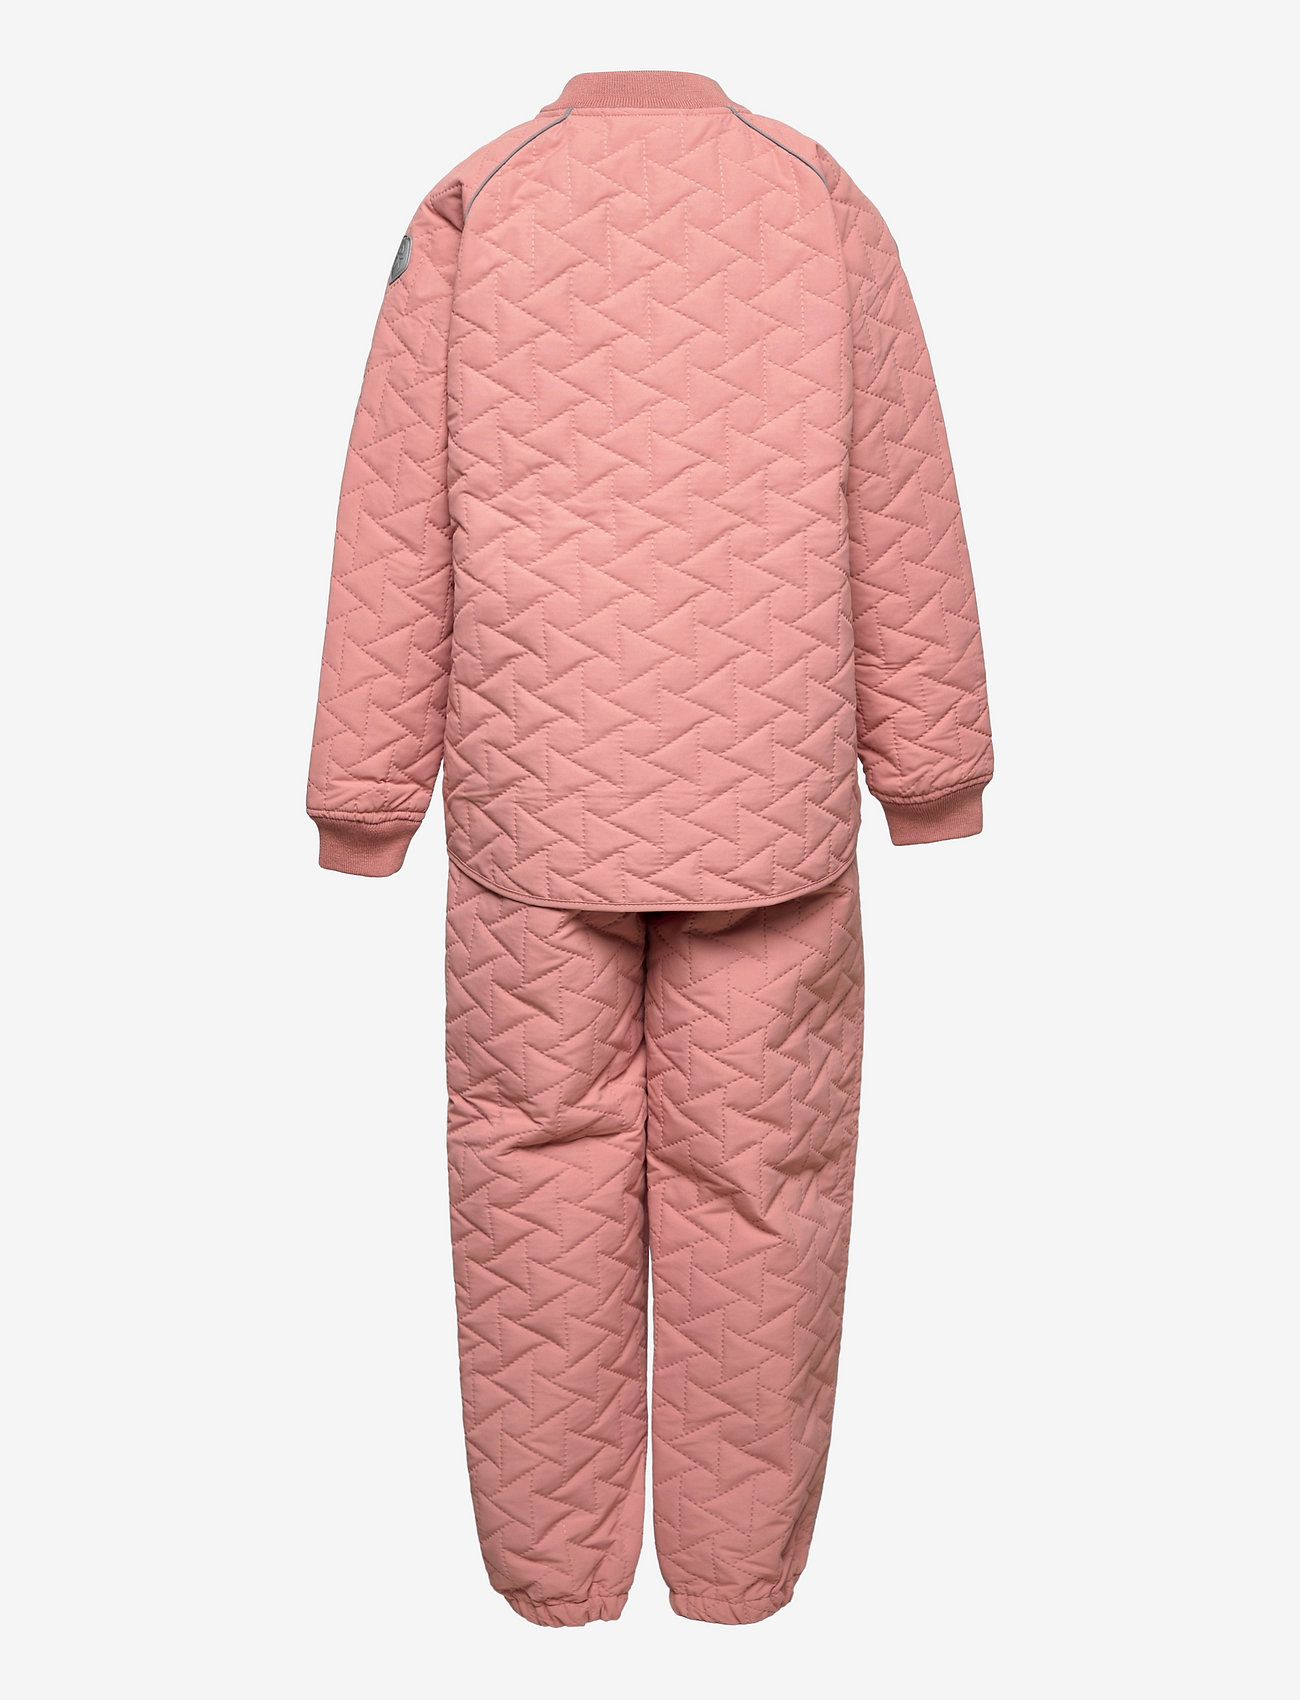 Color Kids - Thermal set - zestawy termoizolacyjne - old rose - 1